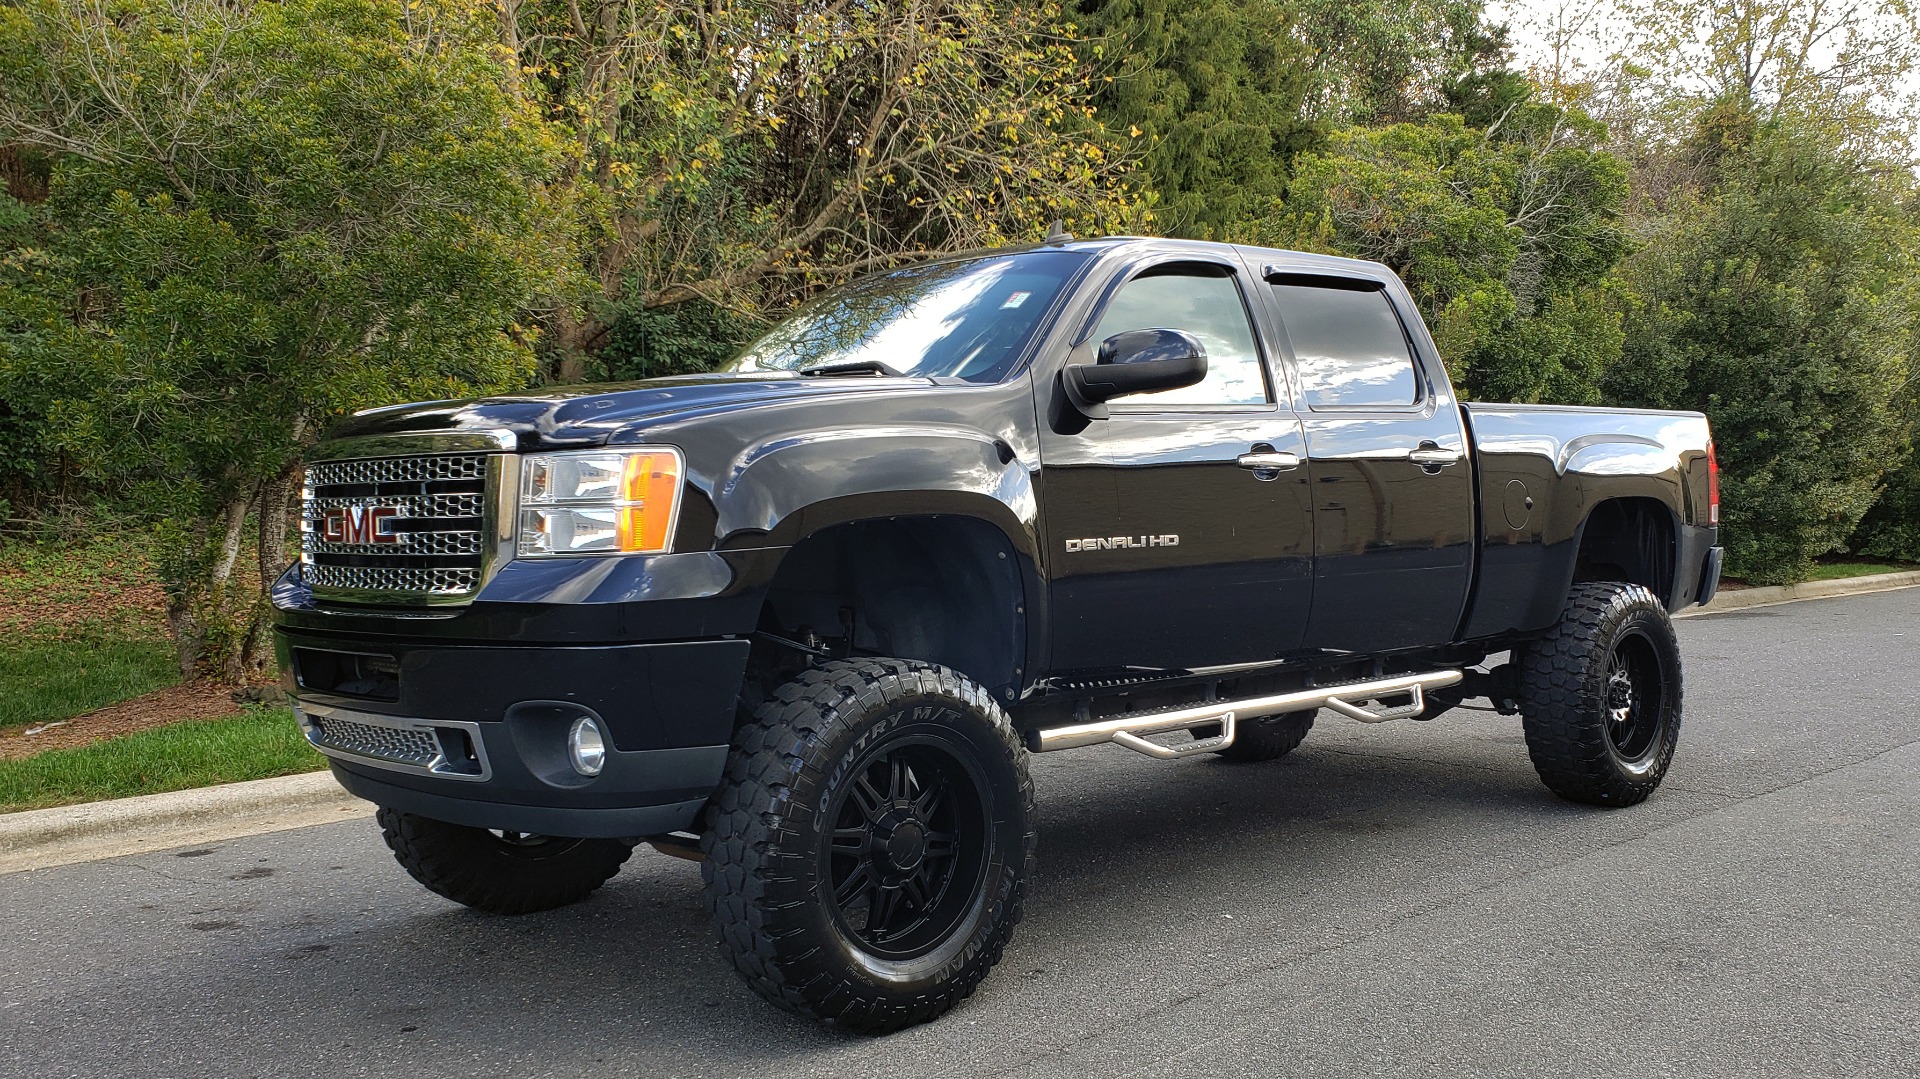 Used 2012 GMC SIERRA 2500HD DENALI CREWCAB 4X4 / LIFTED / BIG TIRES / REARVIEW for sale Sold at Formula Imports in Charlotte NC 28227 1